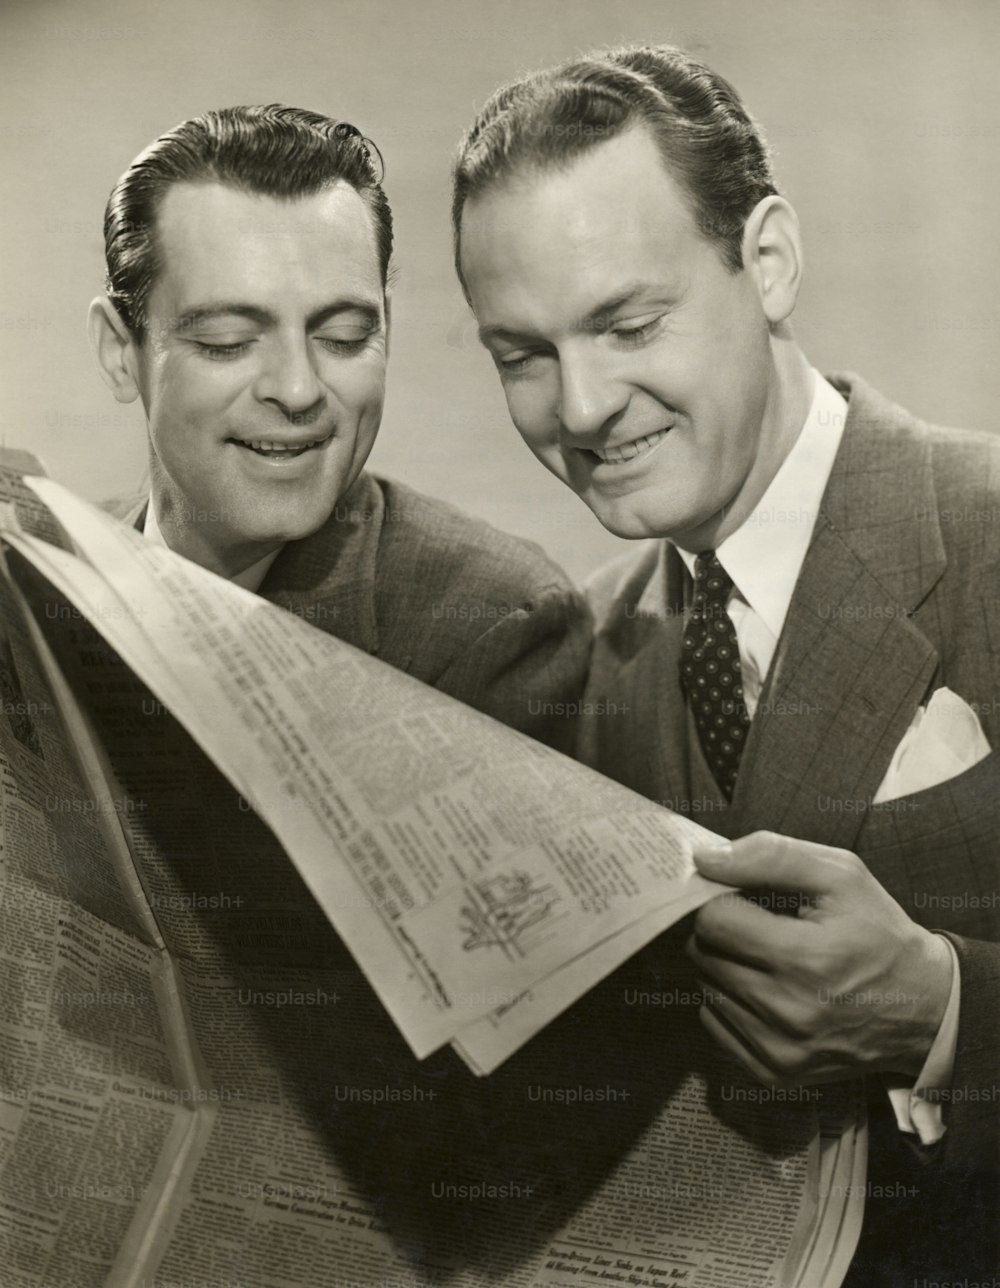 UNITED STATES - CIRCA 1950s:  Two men in suits reading newspaper.